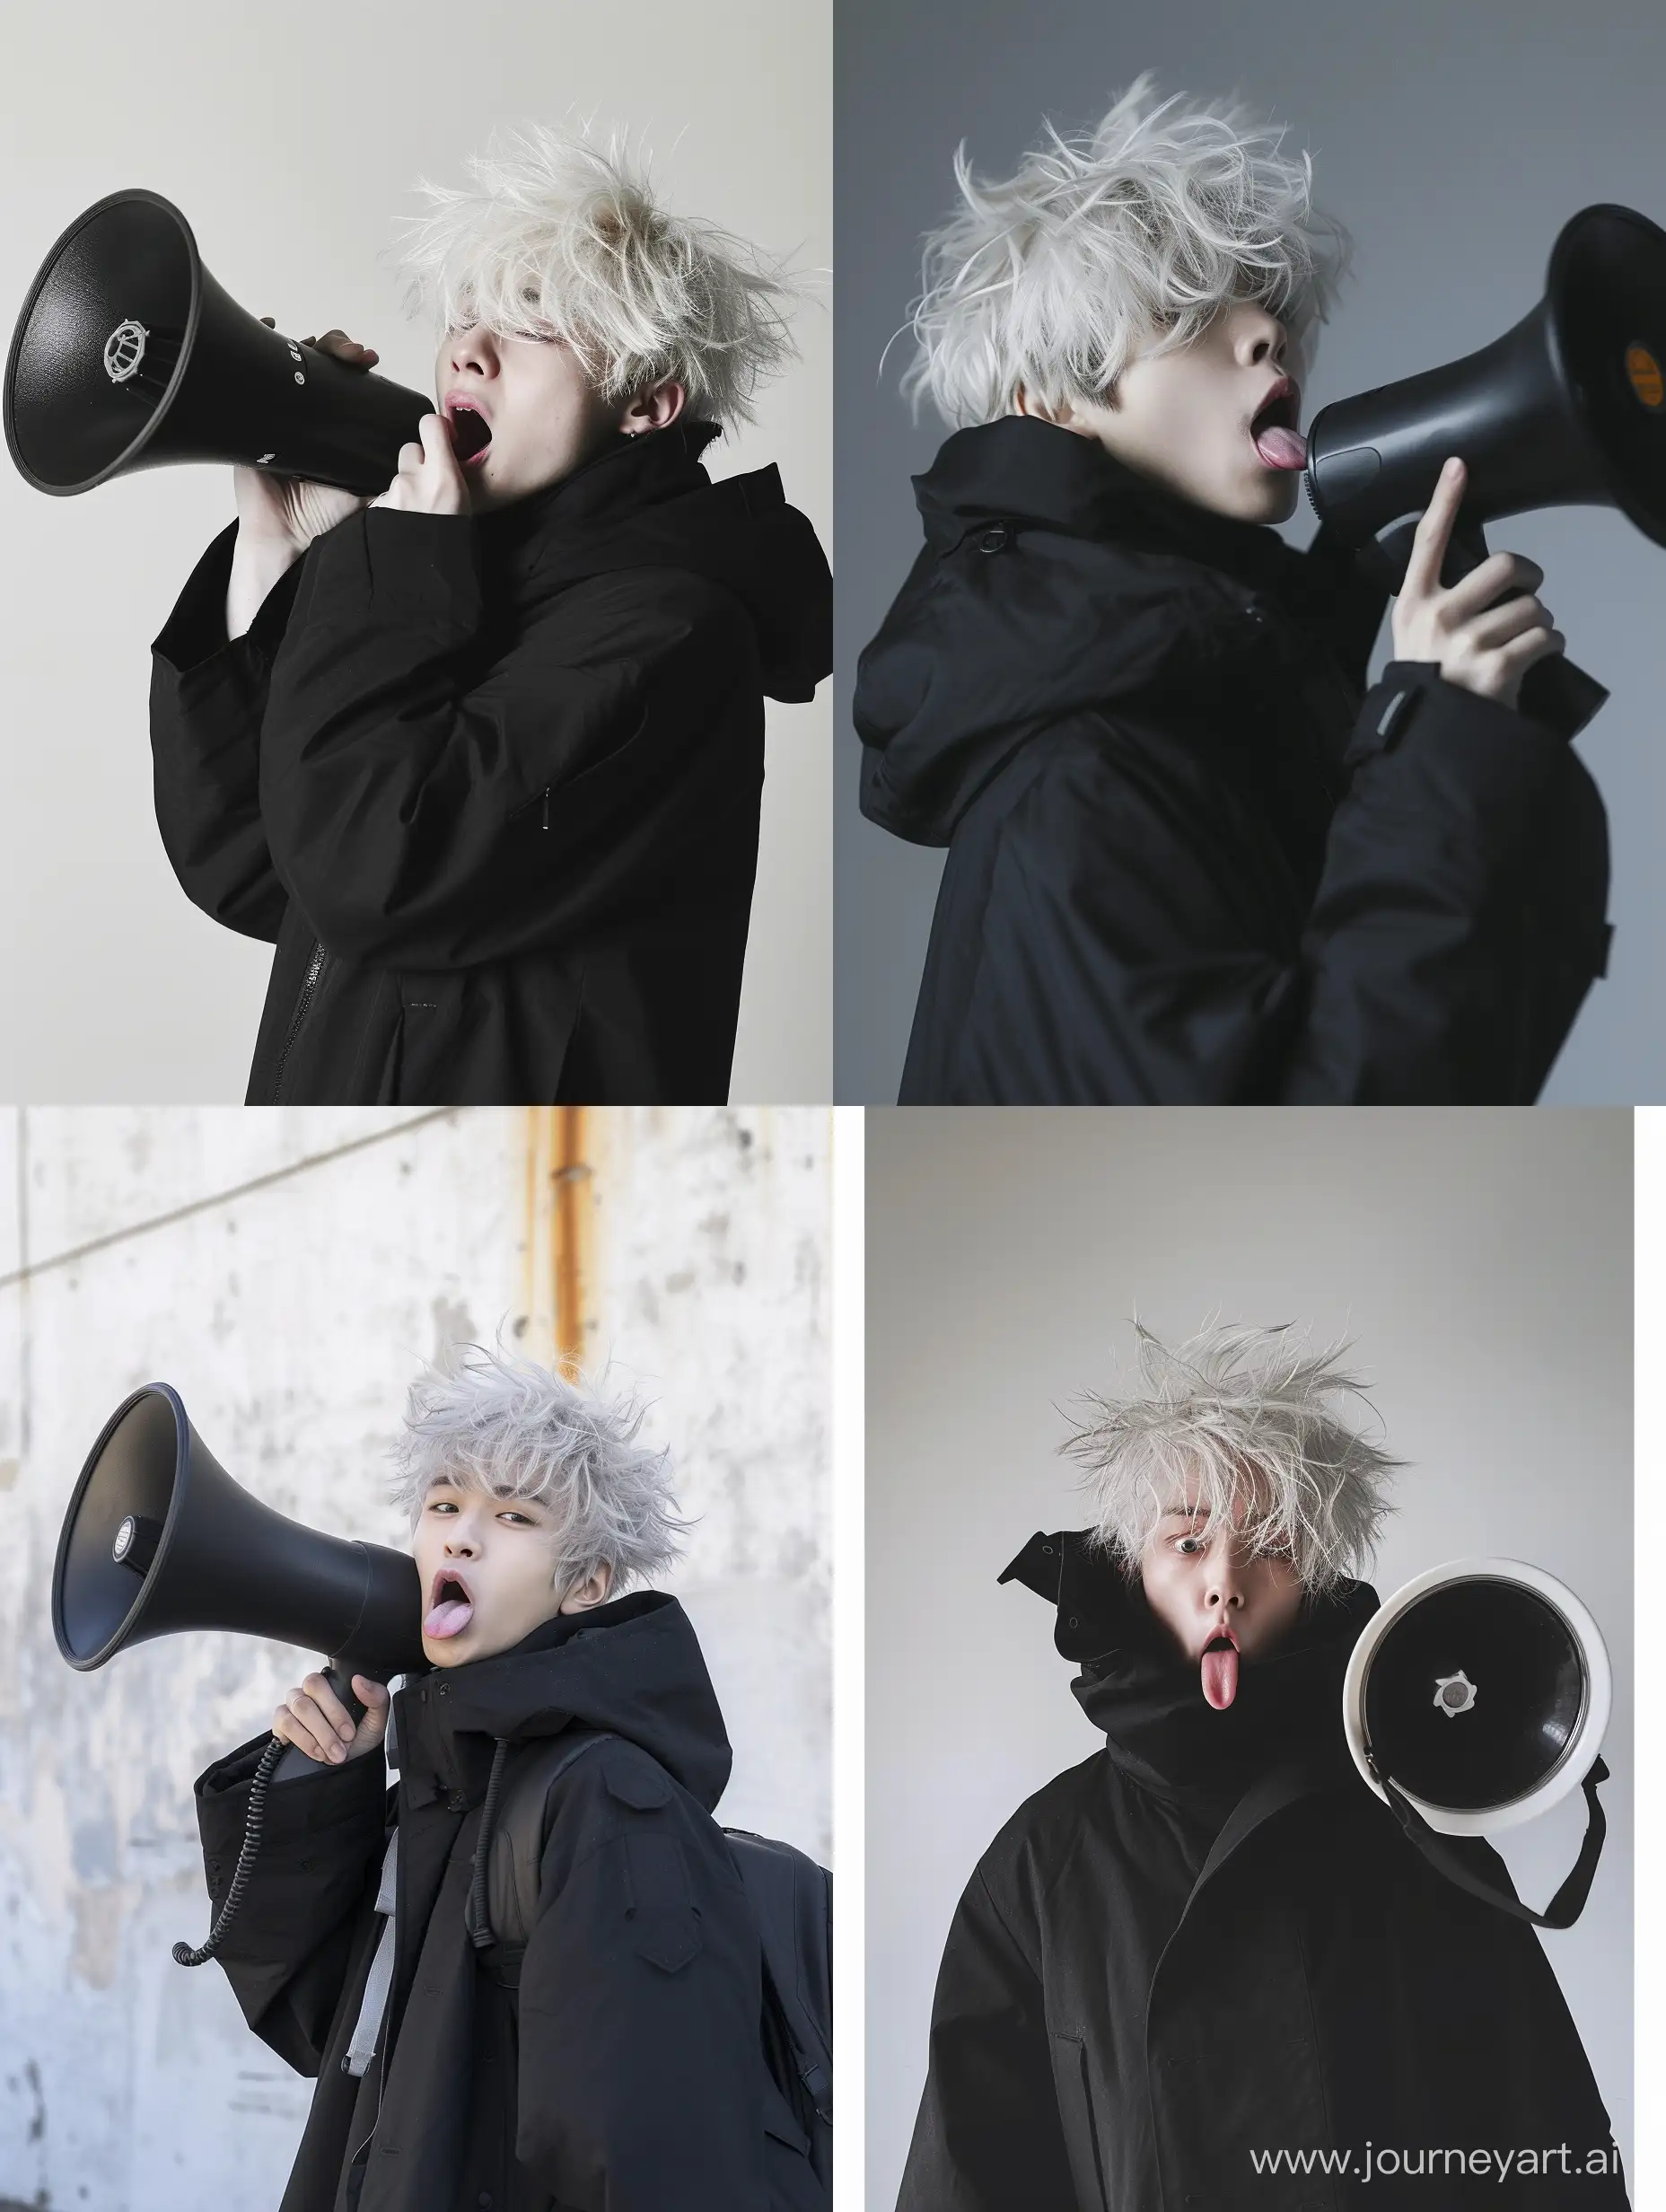 Made a super high angle photo of a young guy like korean idol with white messy hair, the body is clearly. The right hand is holding a small megaphone. Ultra hd. The costume is black parka, high collar. Sticking his tongue out